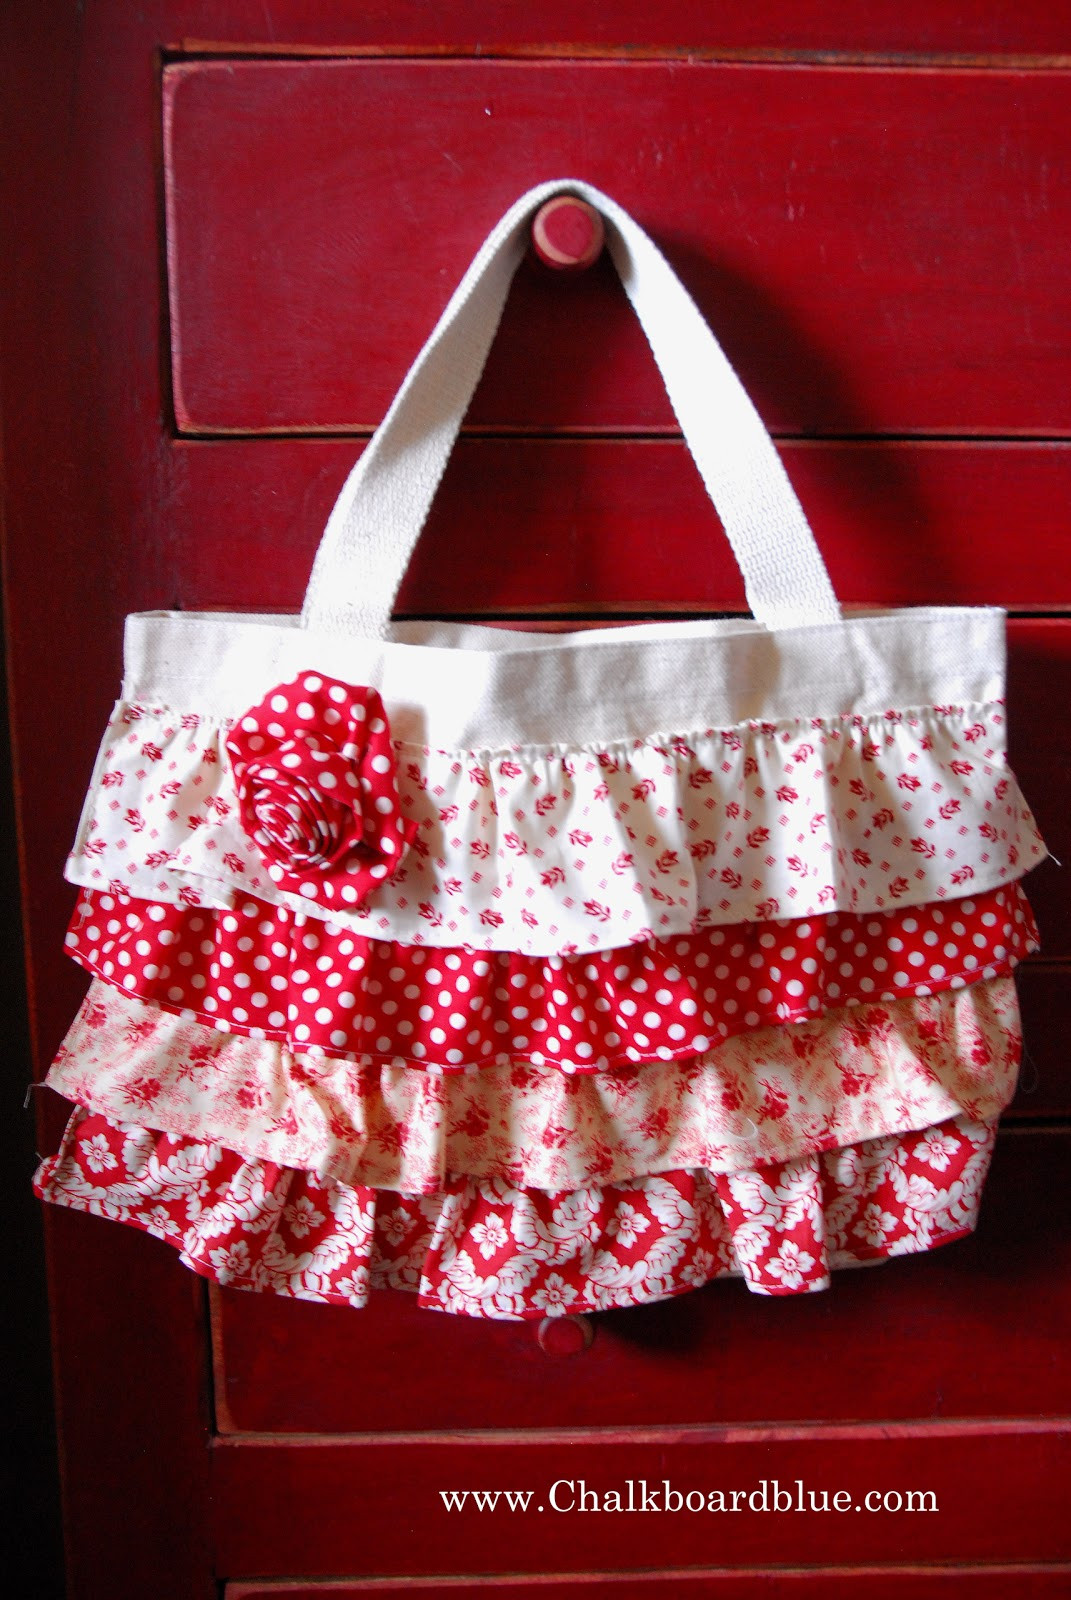 Best ideas about DIY Tote Bag
. Save or Pin Chalkboard Blue Let s Bag it DIY canvas tote bags Now.